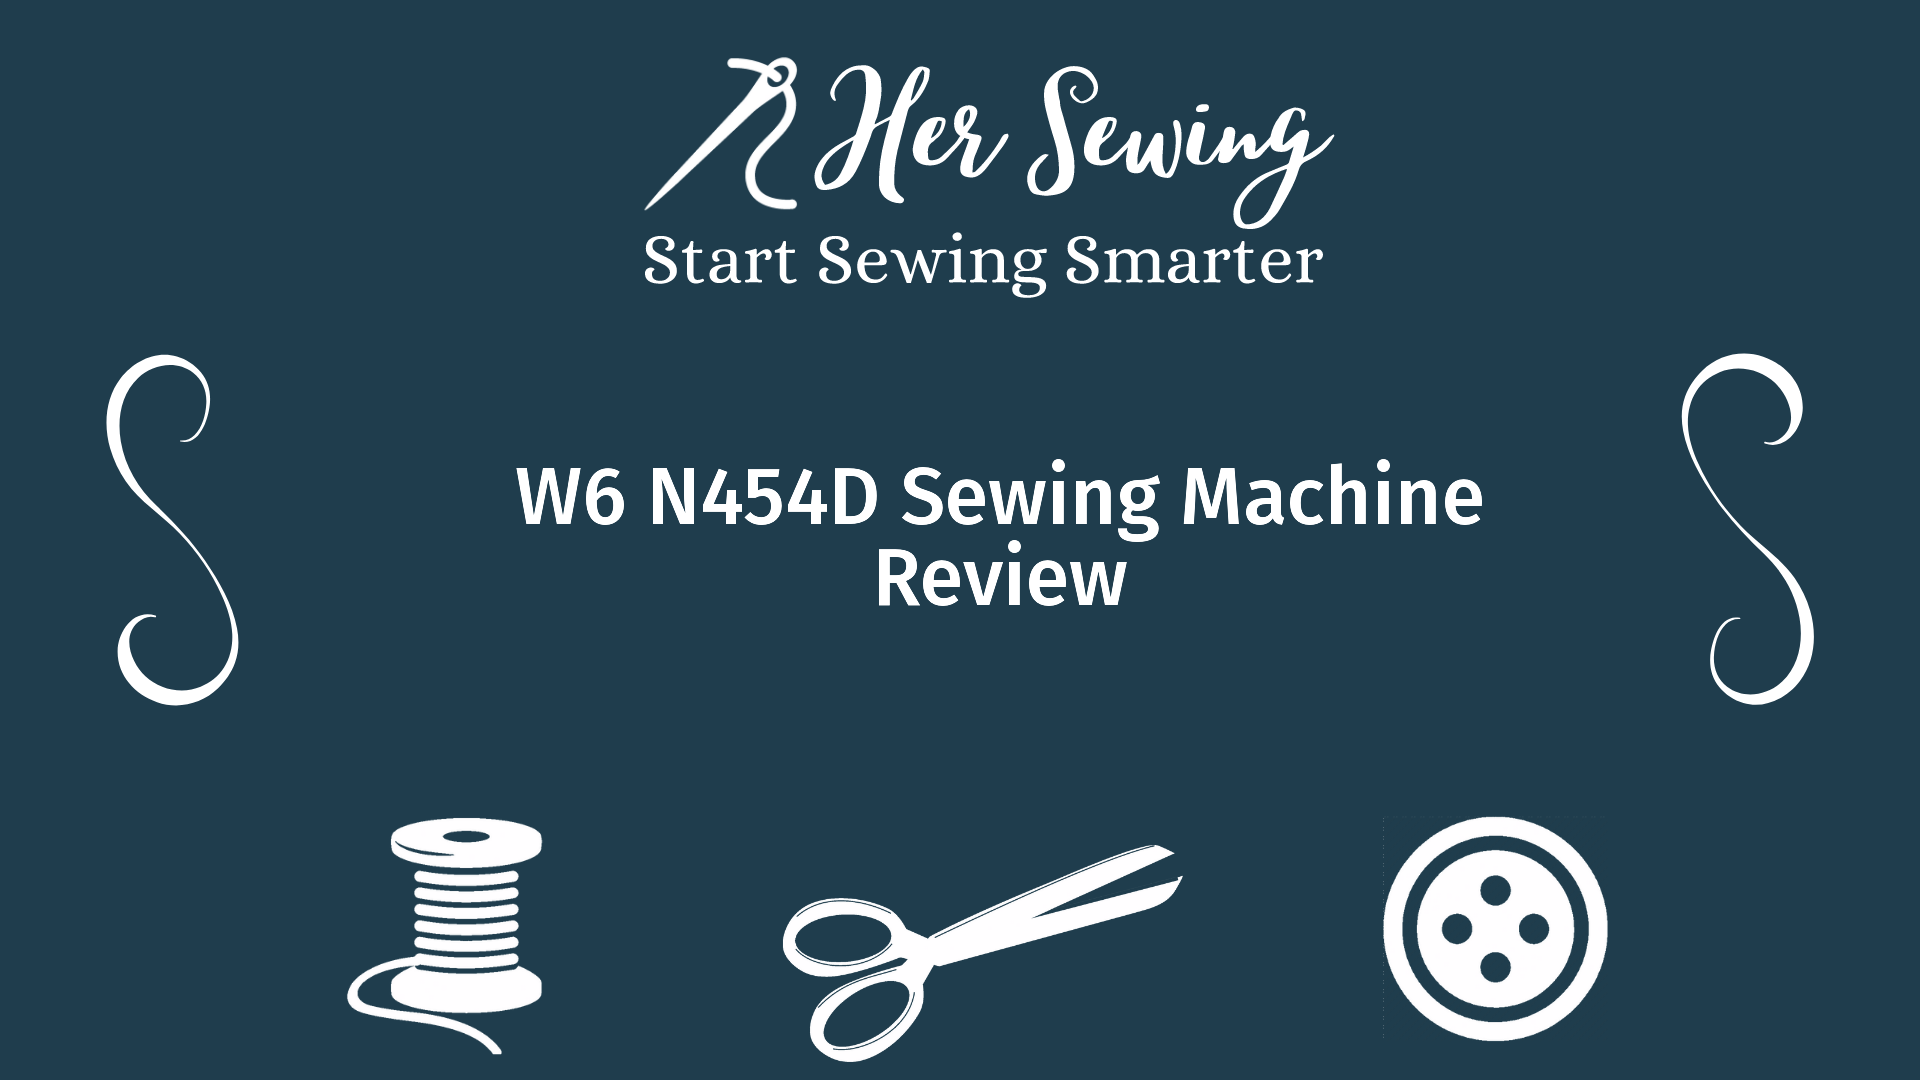 W6 N454D Sewing Machine Review